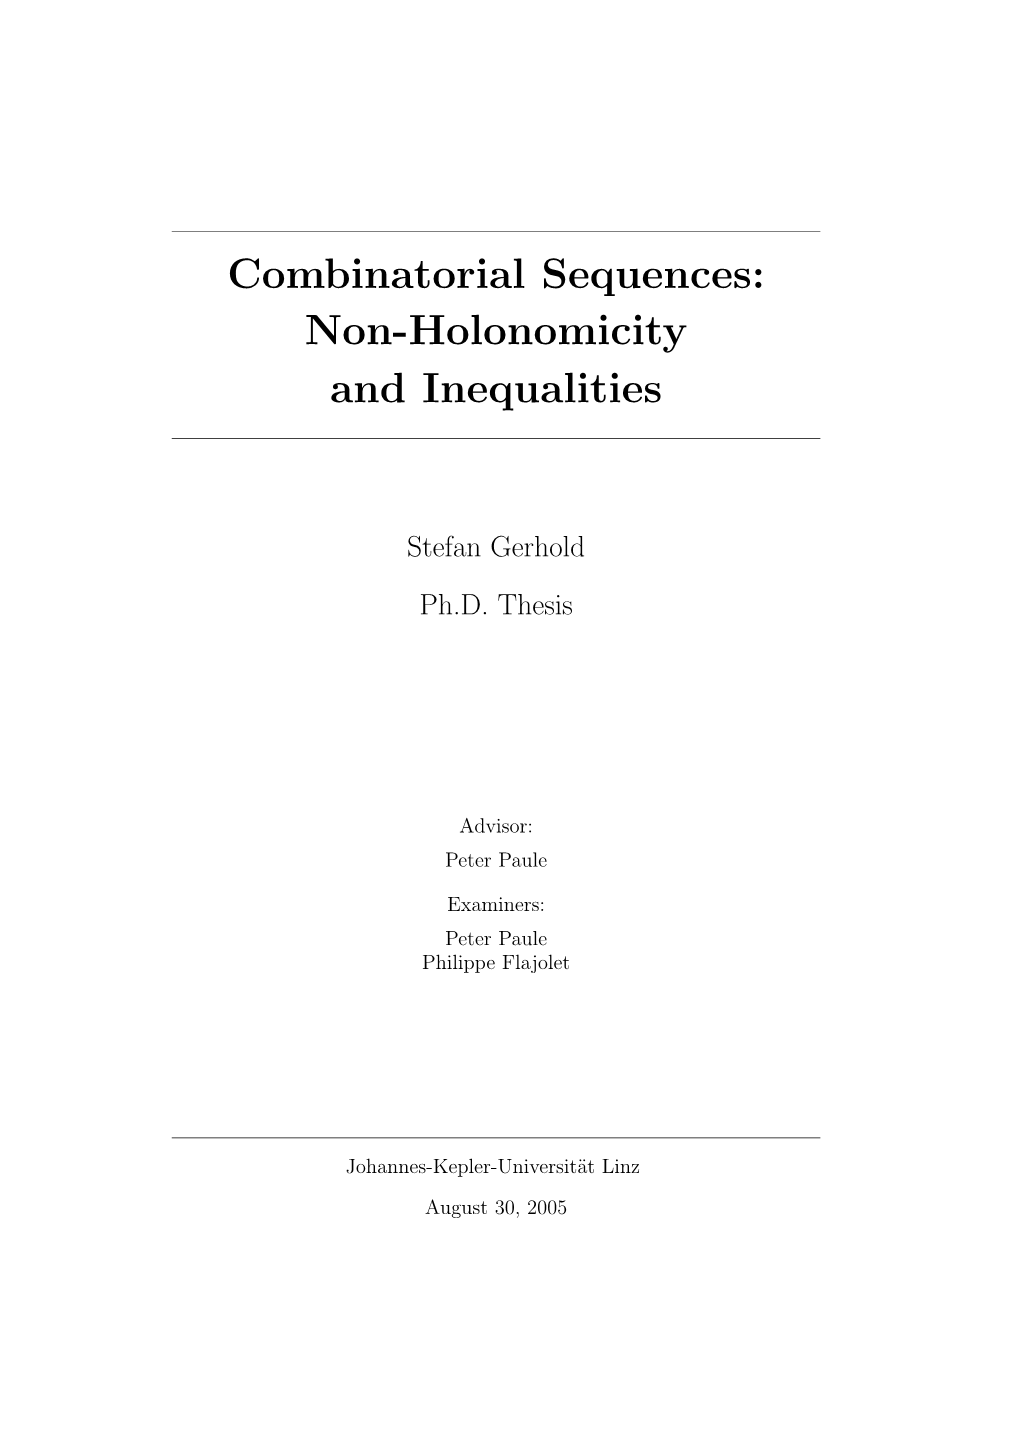 Combinatorial Sequences: Non-Holonomicity and Inequalities